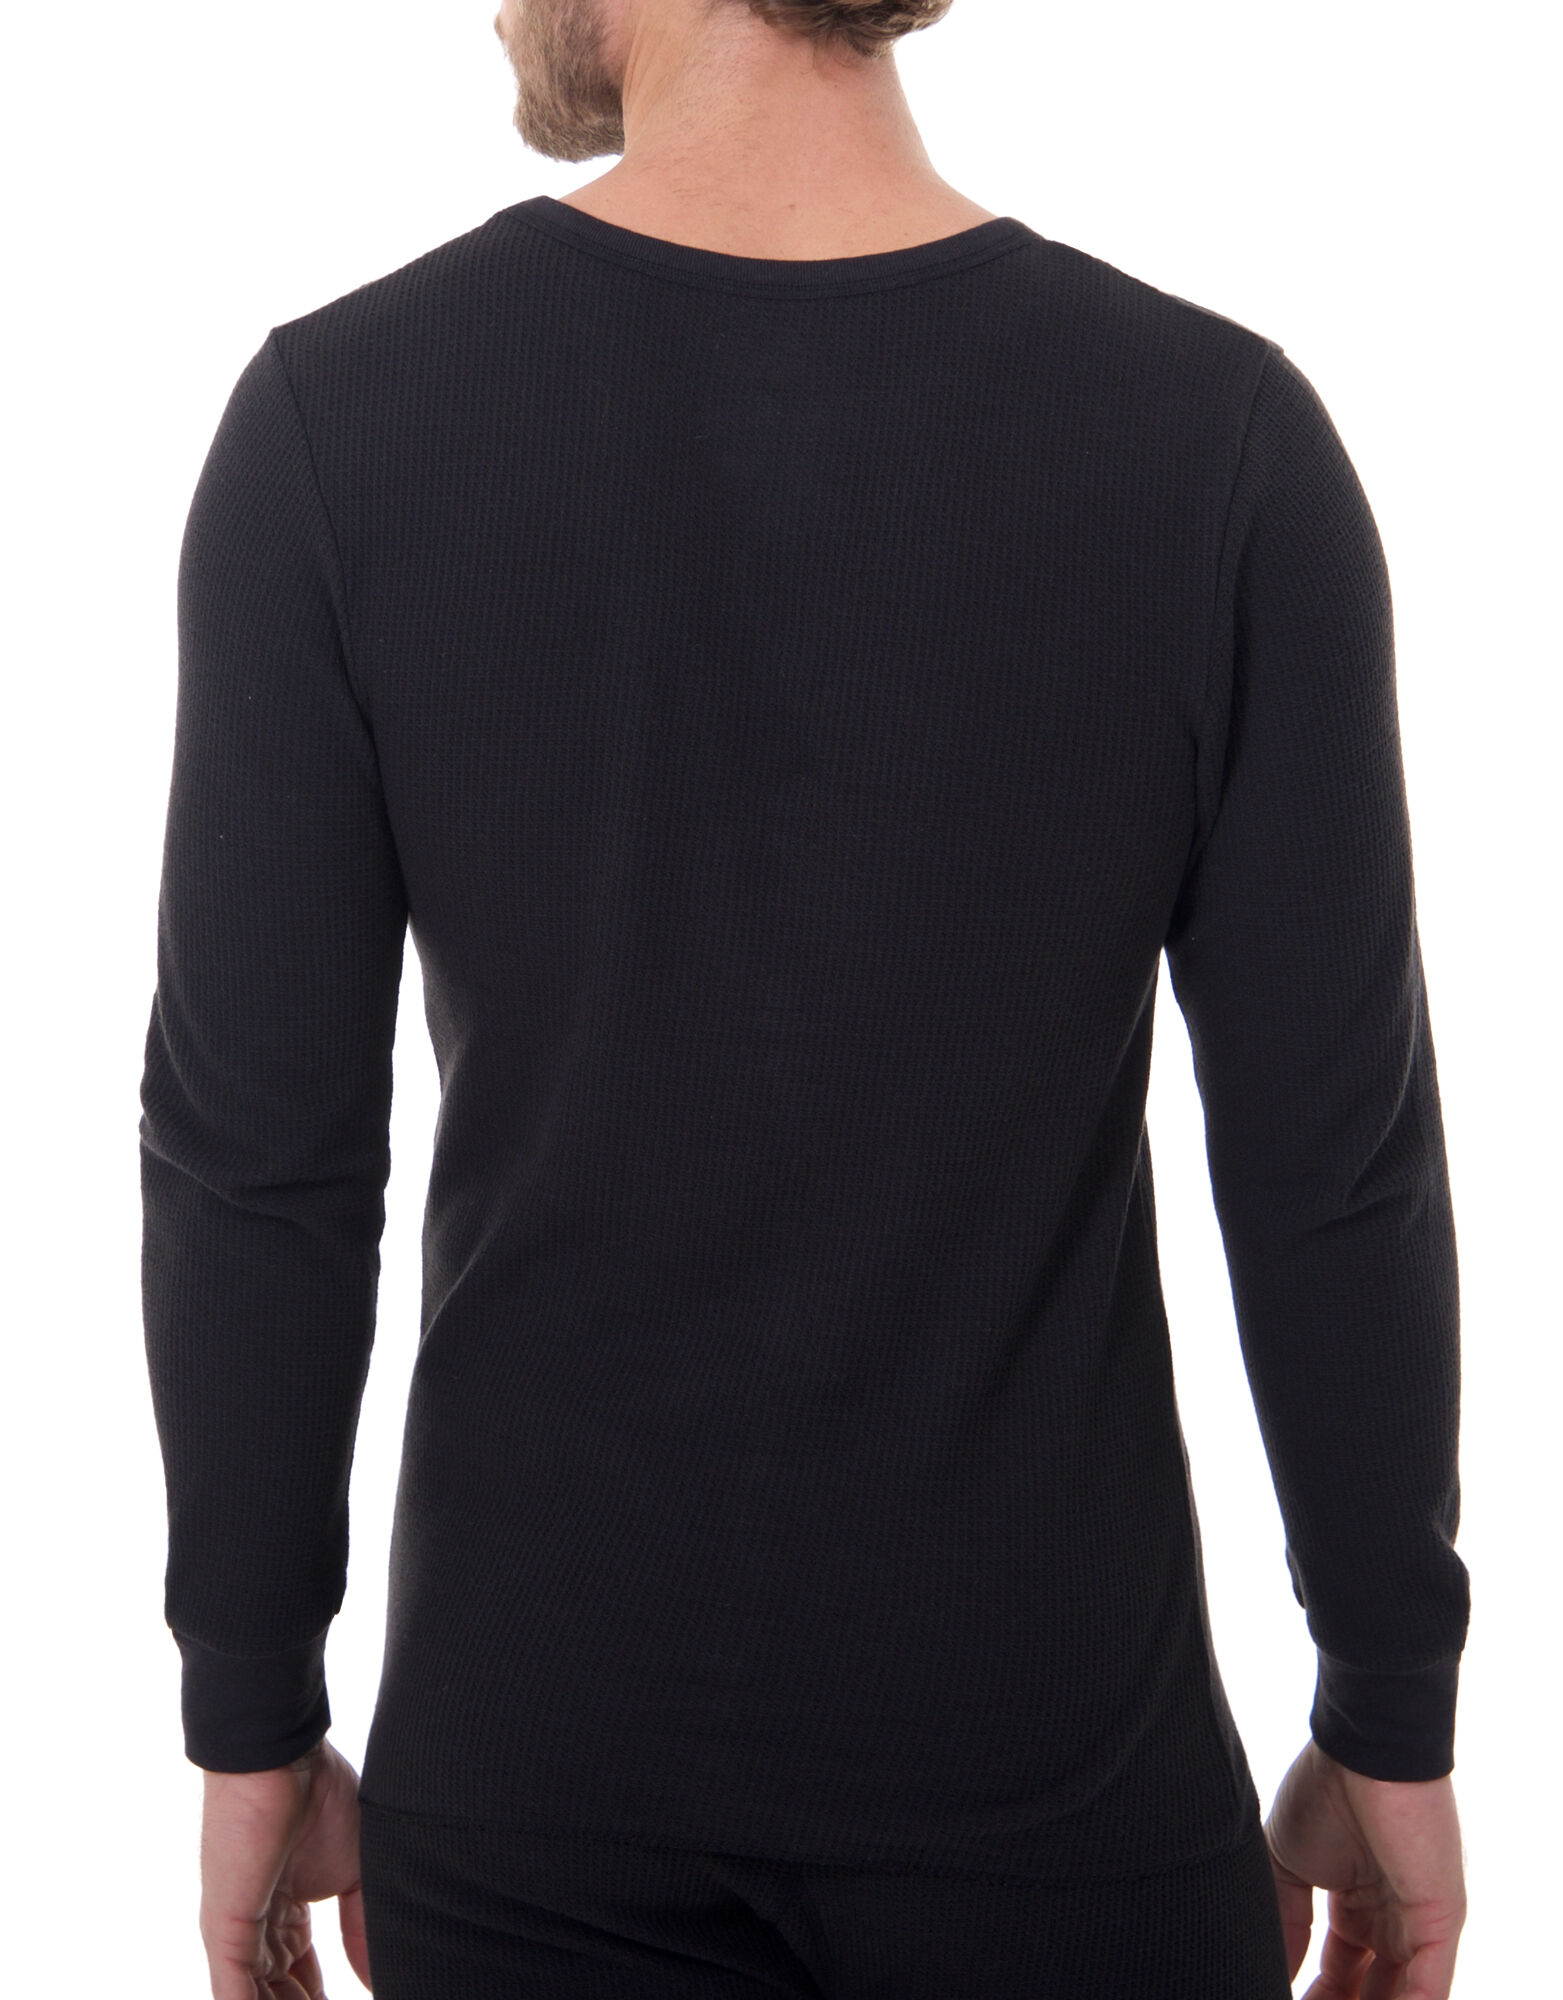 Dickies Mens Heavyweight Cotton Thermal Top